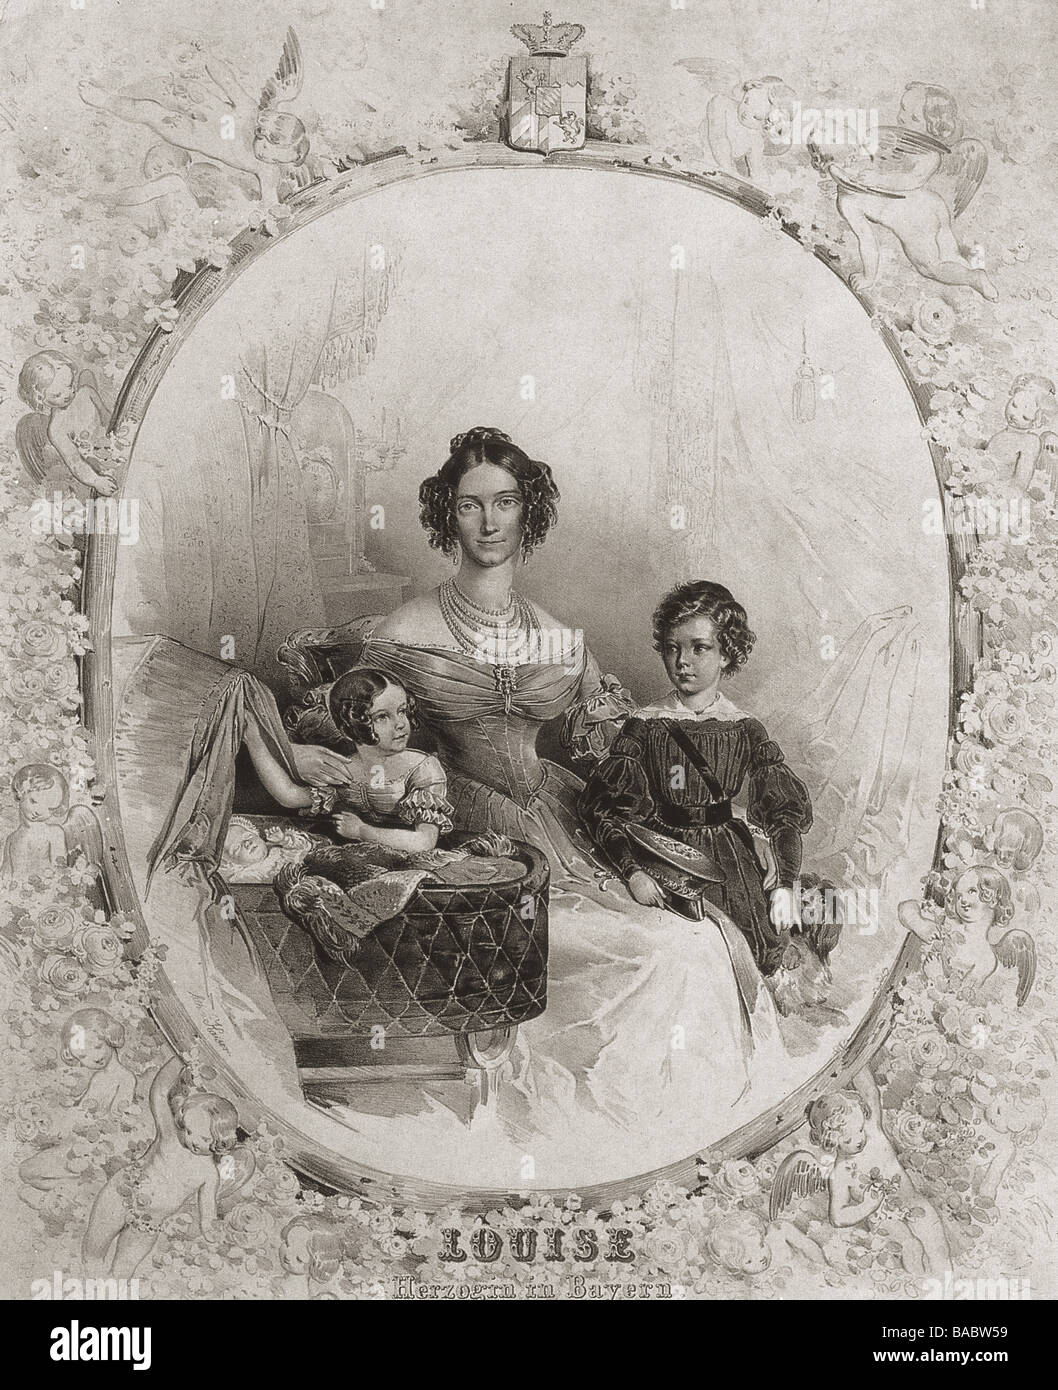 Ludovika Wilhelmine, 30.8.1808 - 26.1.1892, Duchess in Bavaria with children Ludwig Wilhelm (1831 - 1920, Duke in Bavaria), Helene 'Nene' (1834 - 1890, Prncess of Thurn und Taxis), and Elisabeth 'Sisi' (1837 - 1898, Empress of Austria, queen of Hungary), lithograph by Kaiser, 1838, , Stock Photo